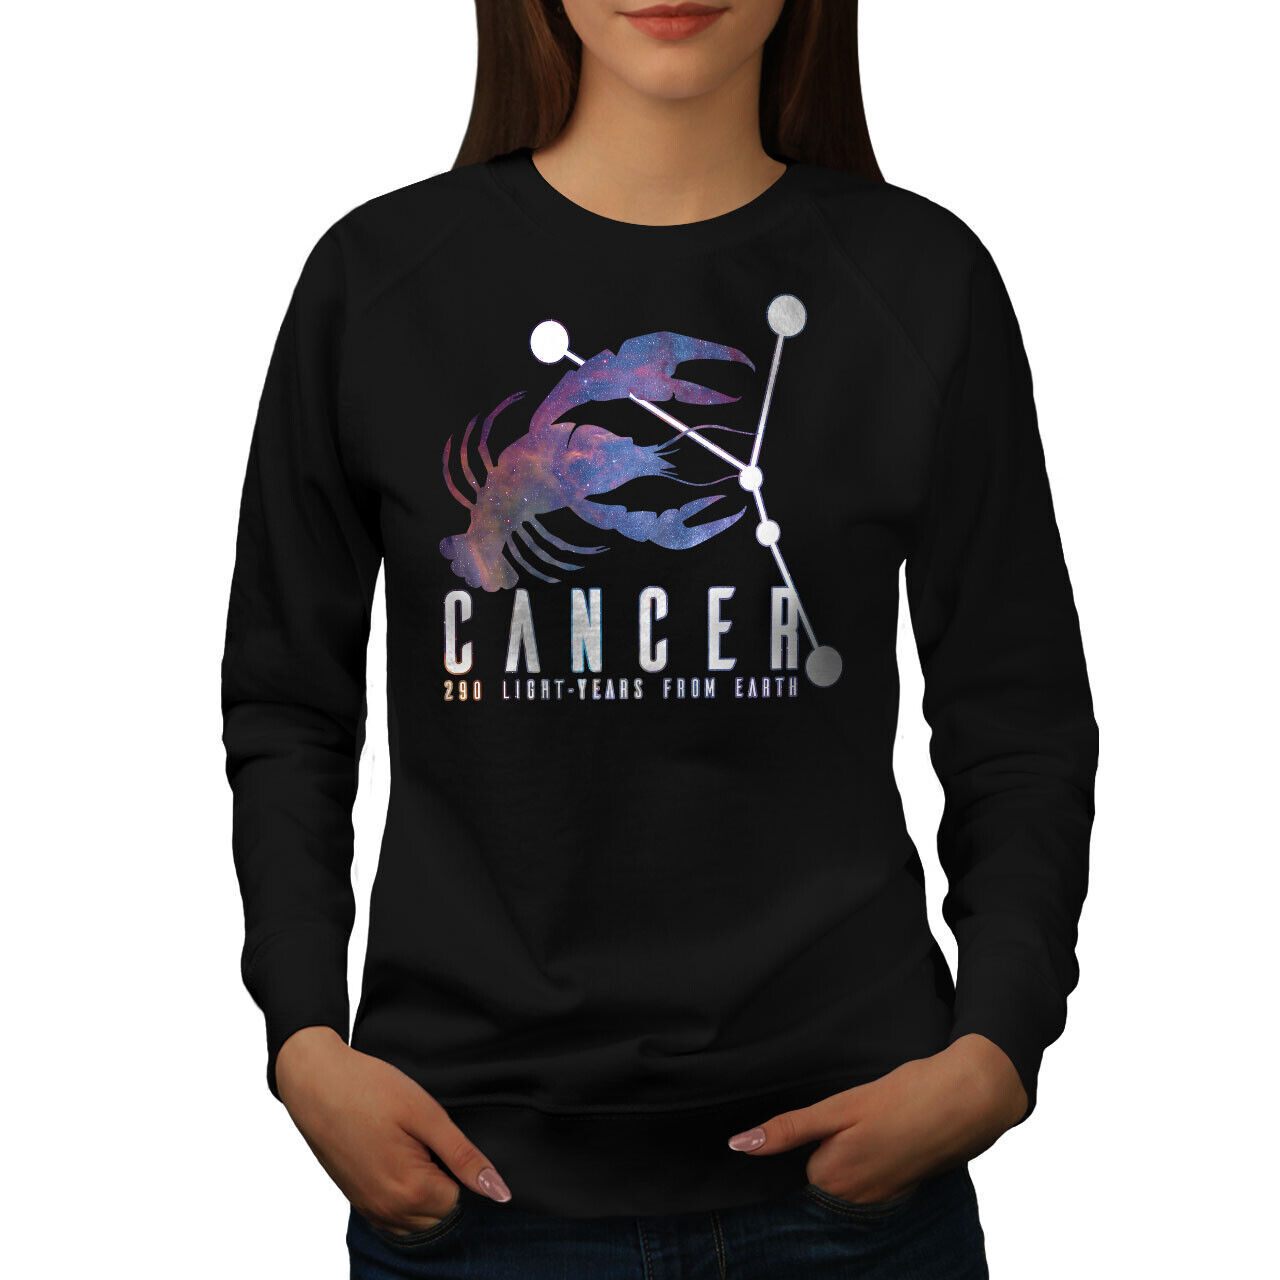 Primary image for Wellcoda Cancer Zodiac Sign Womens Sweatshirt, Horoscope Casual Pullover Jumper